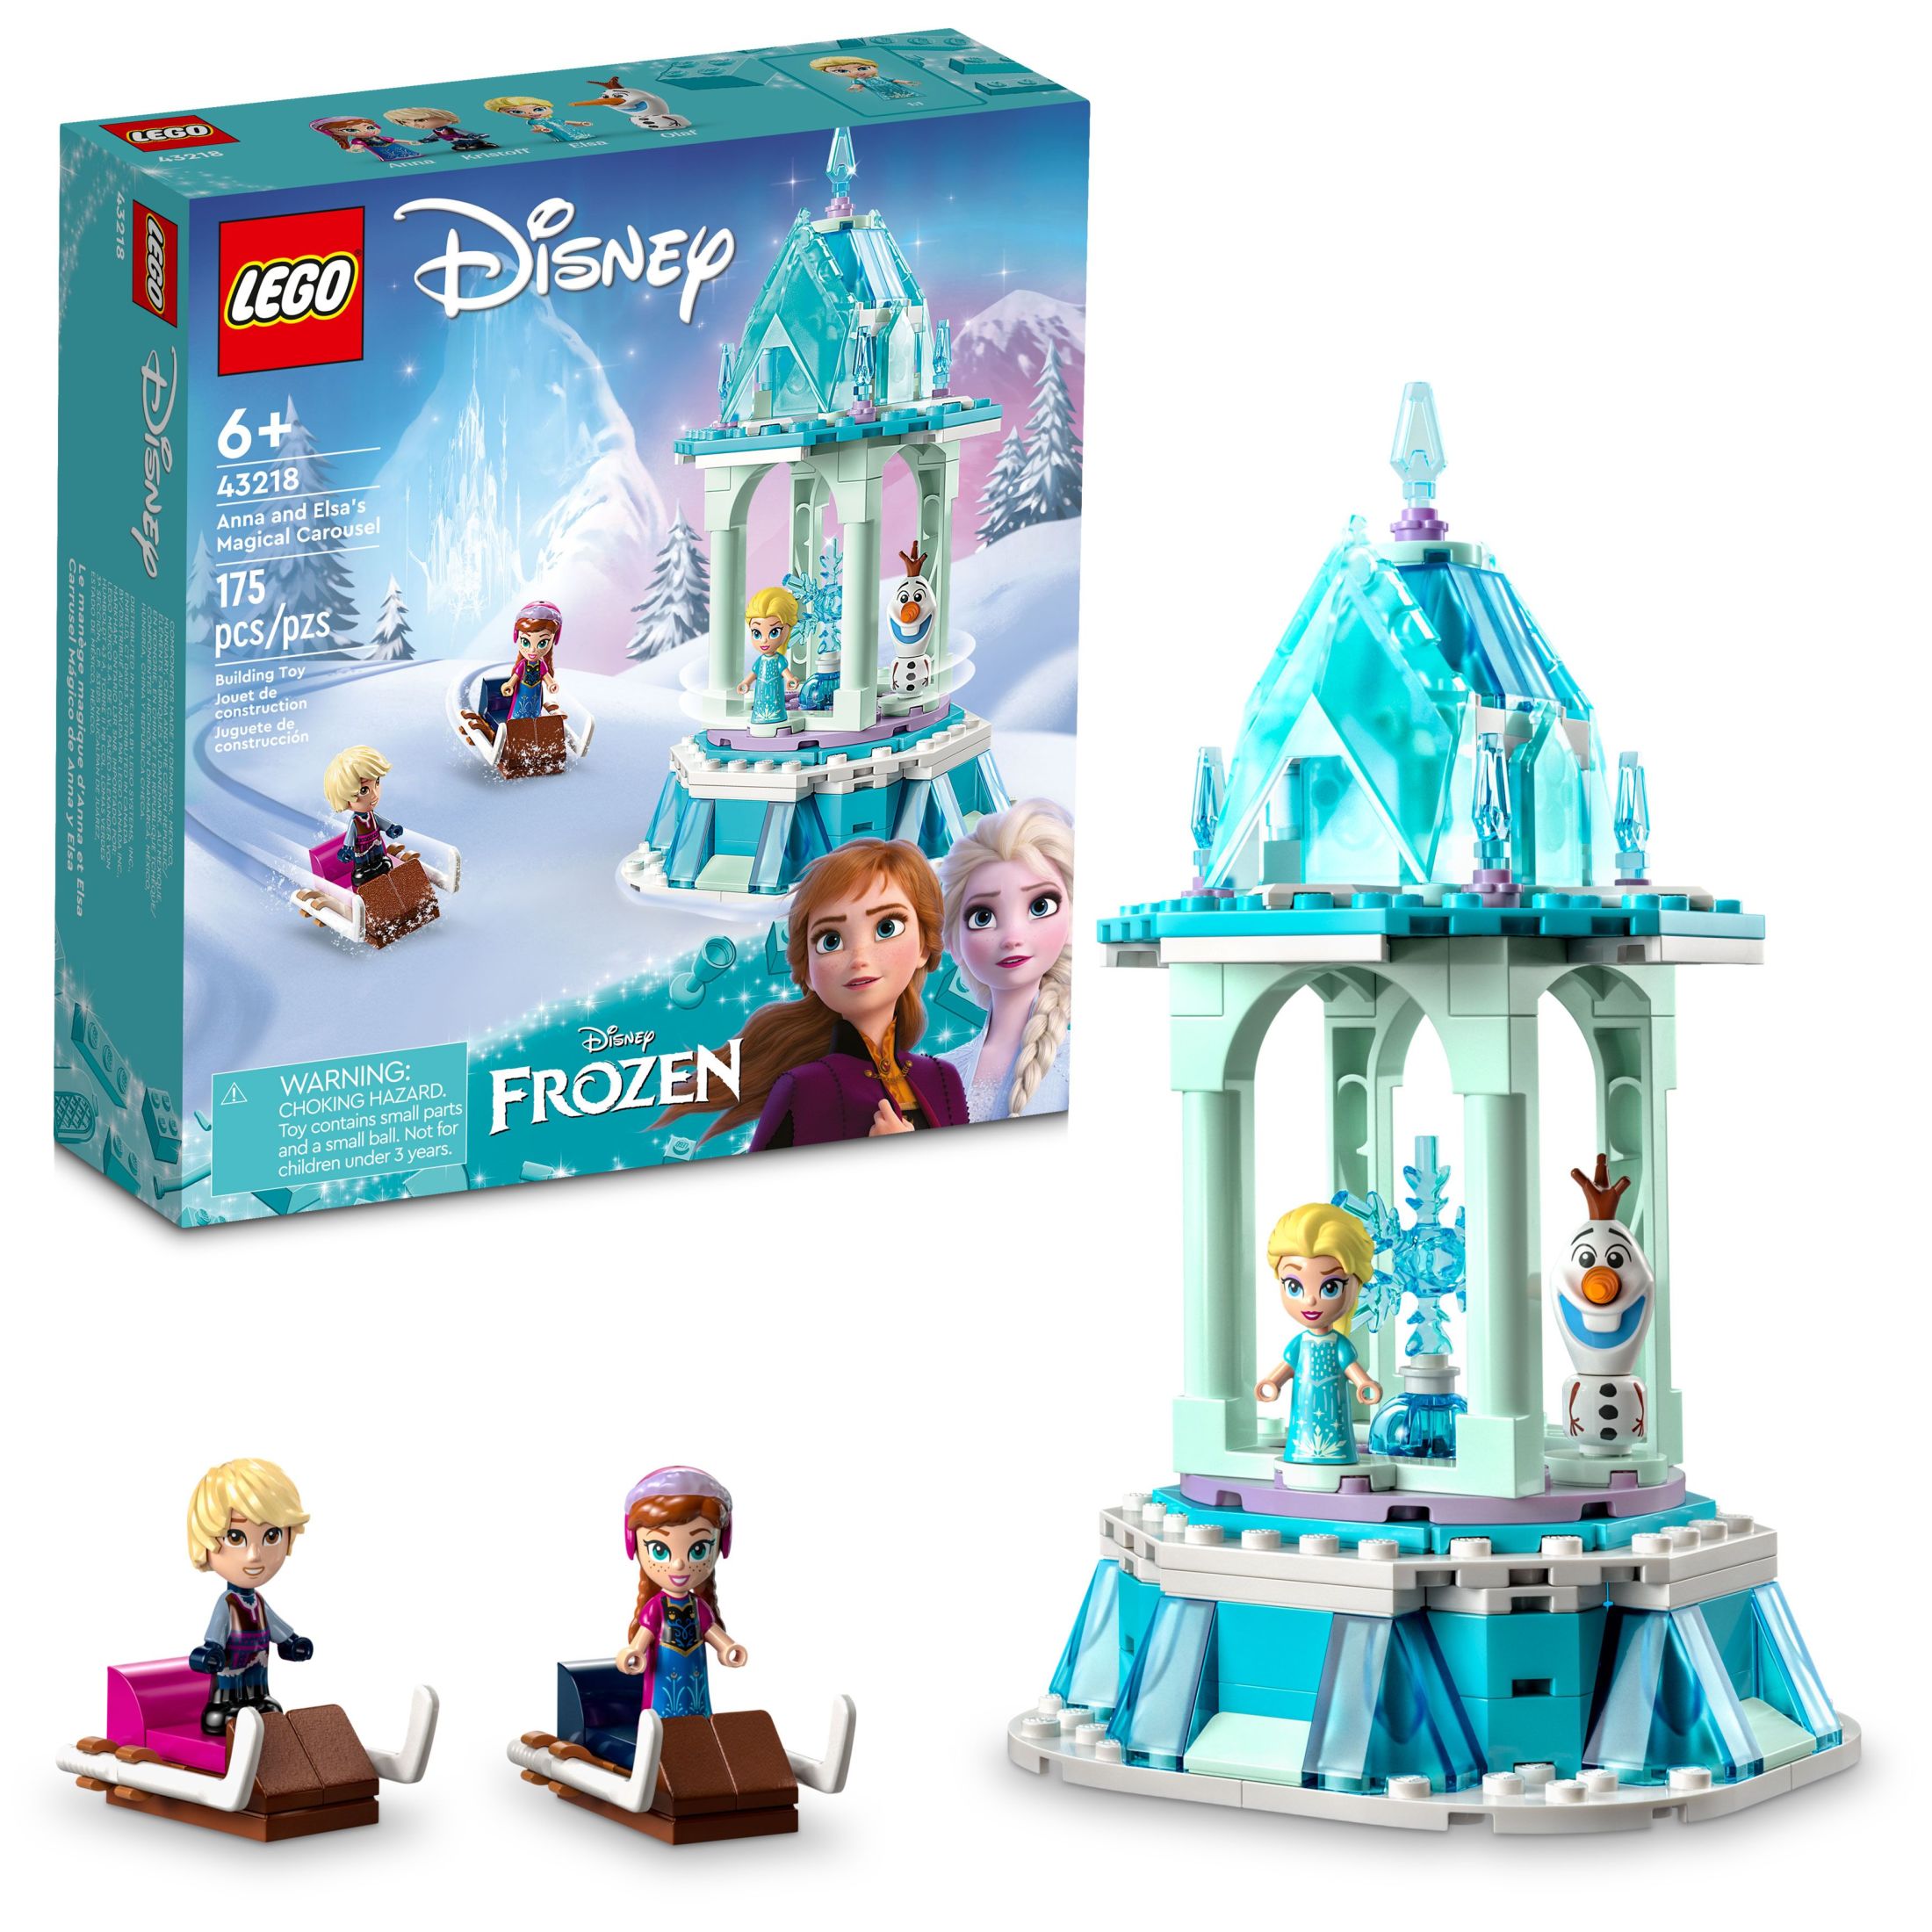 LEGO Disney Frozen Anna and Elsa’s Magical Carousel 43218 Ice Palace Building Toy Set with Disney Princess Elsa, Anna and Olaf, Great Birthday Gift for 6 Year Olds - image 1 of 8